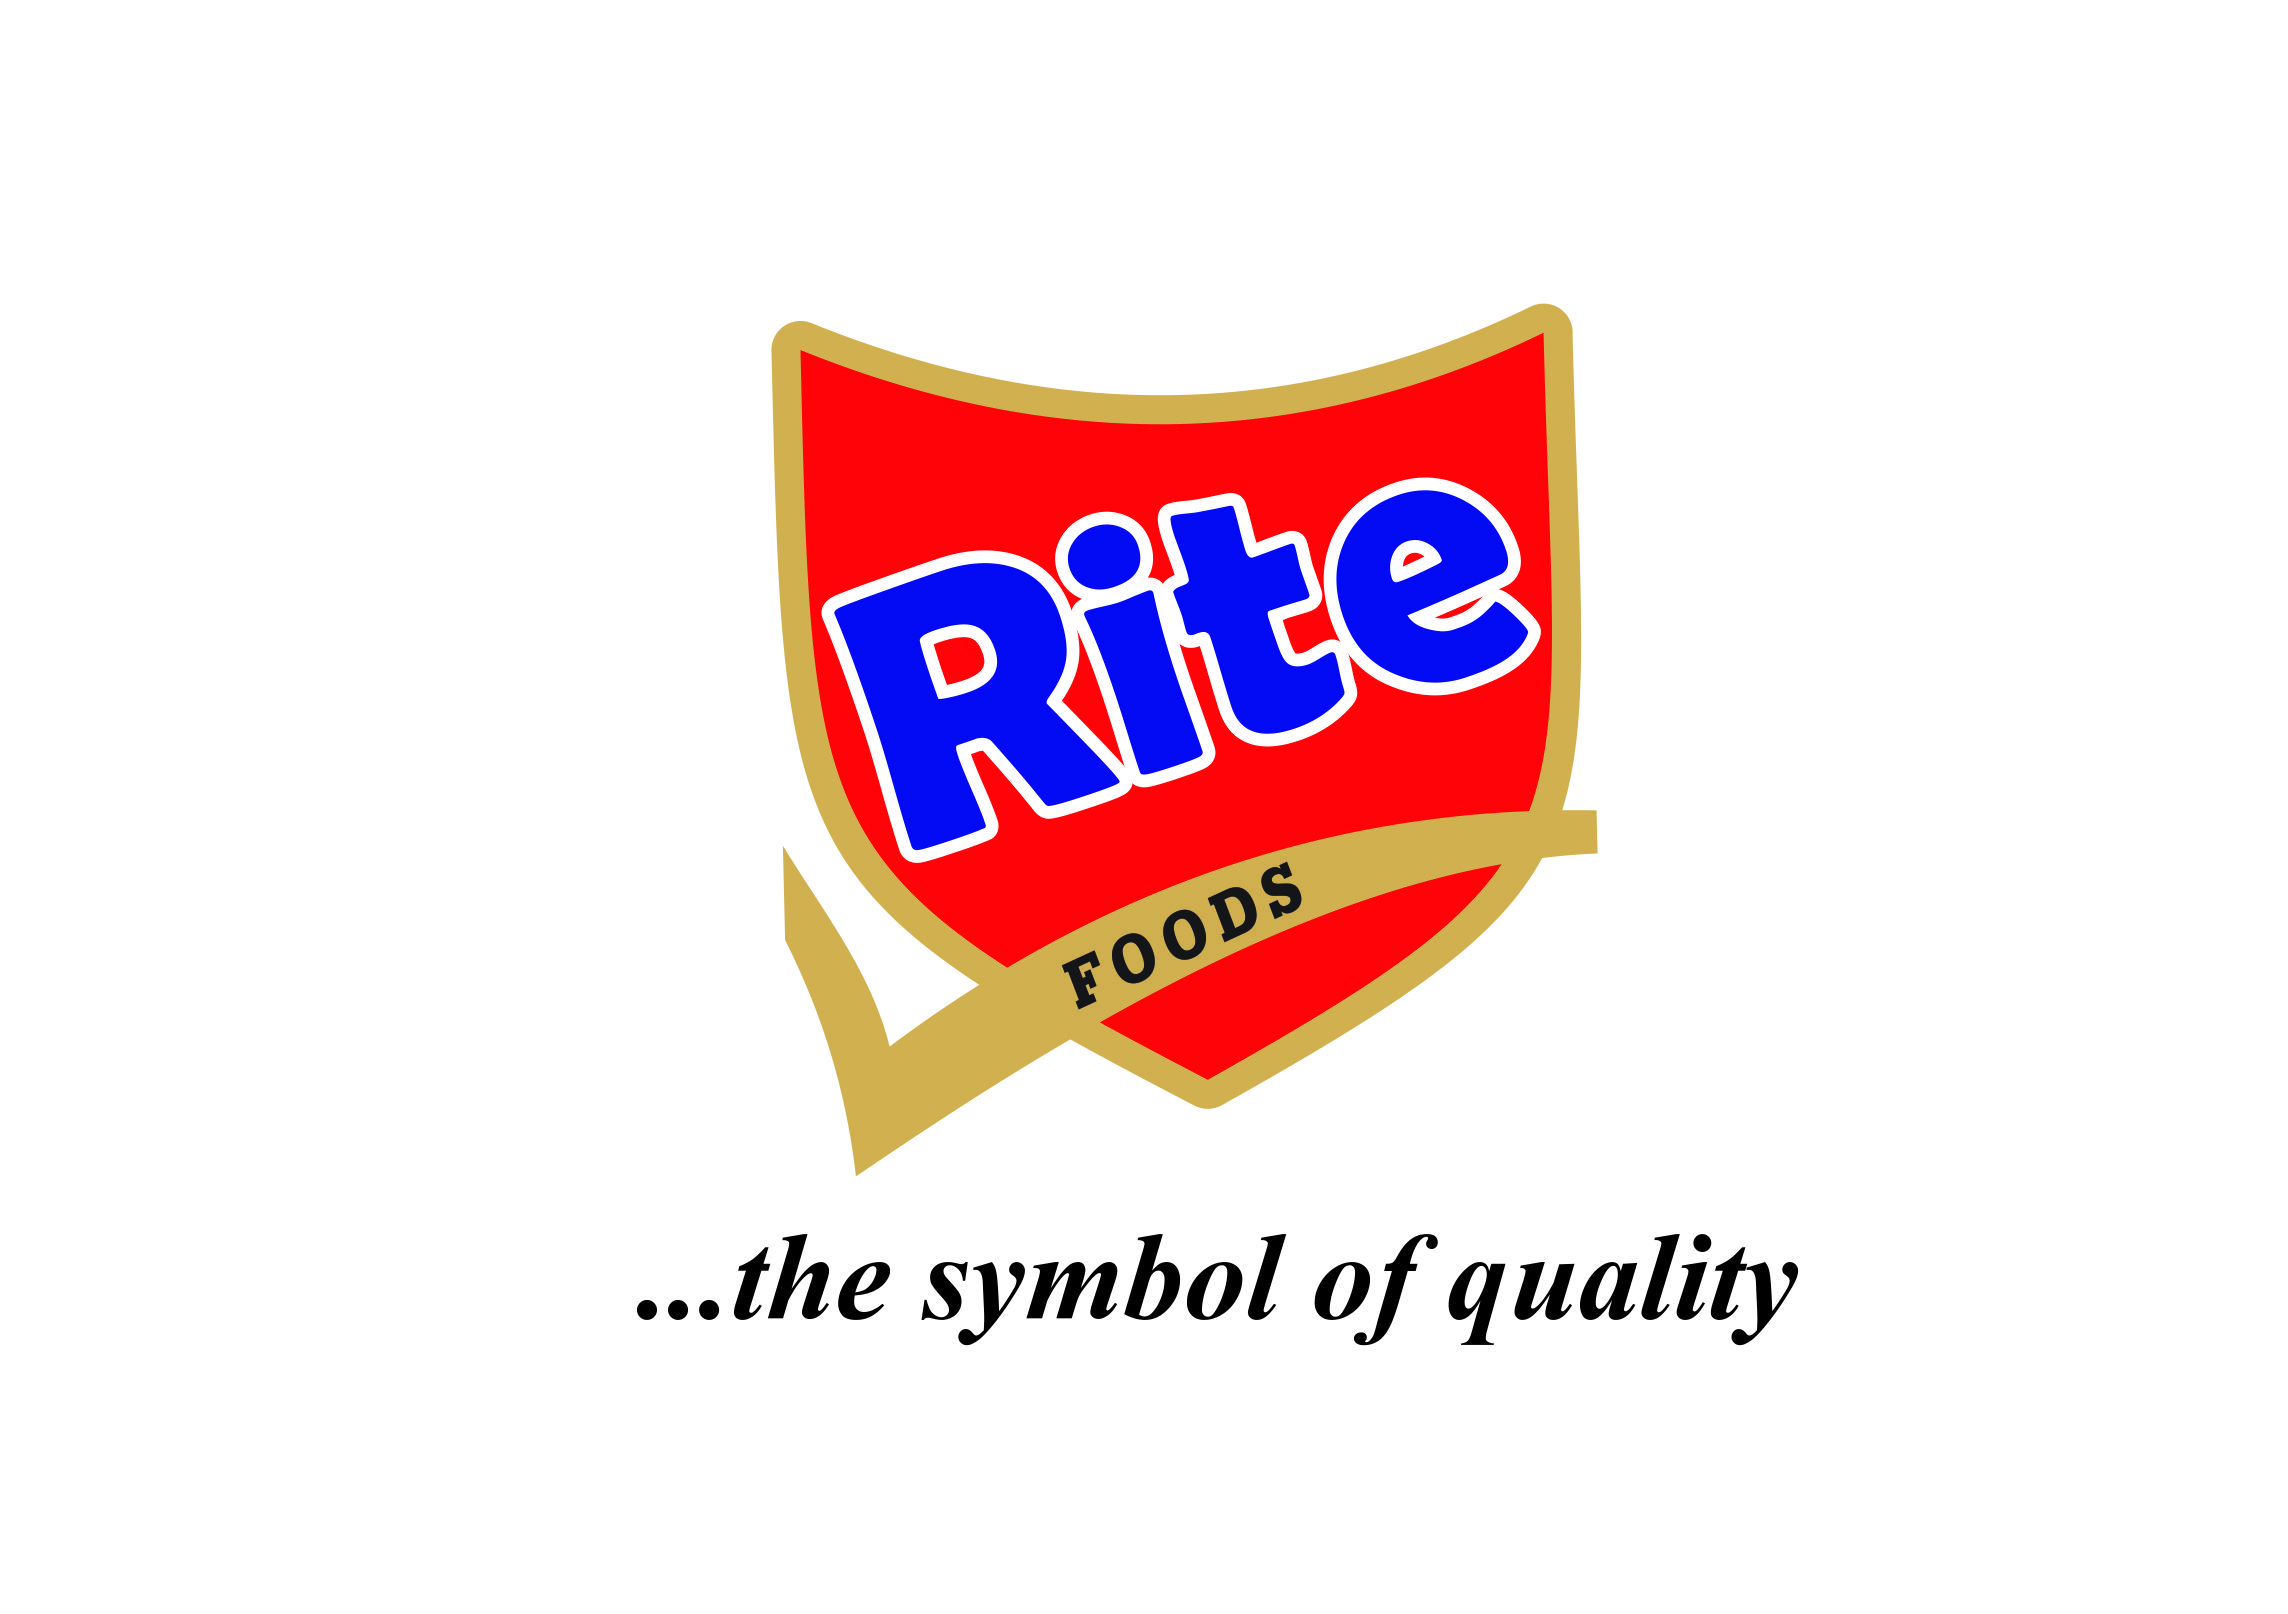 Eid el-Fitri celebration: Rite Foods urges refreshing moments for Muslims